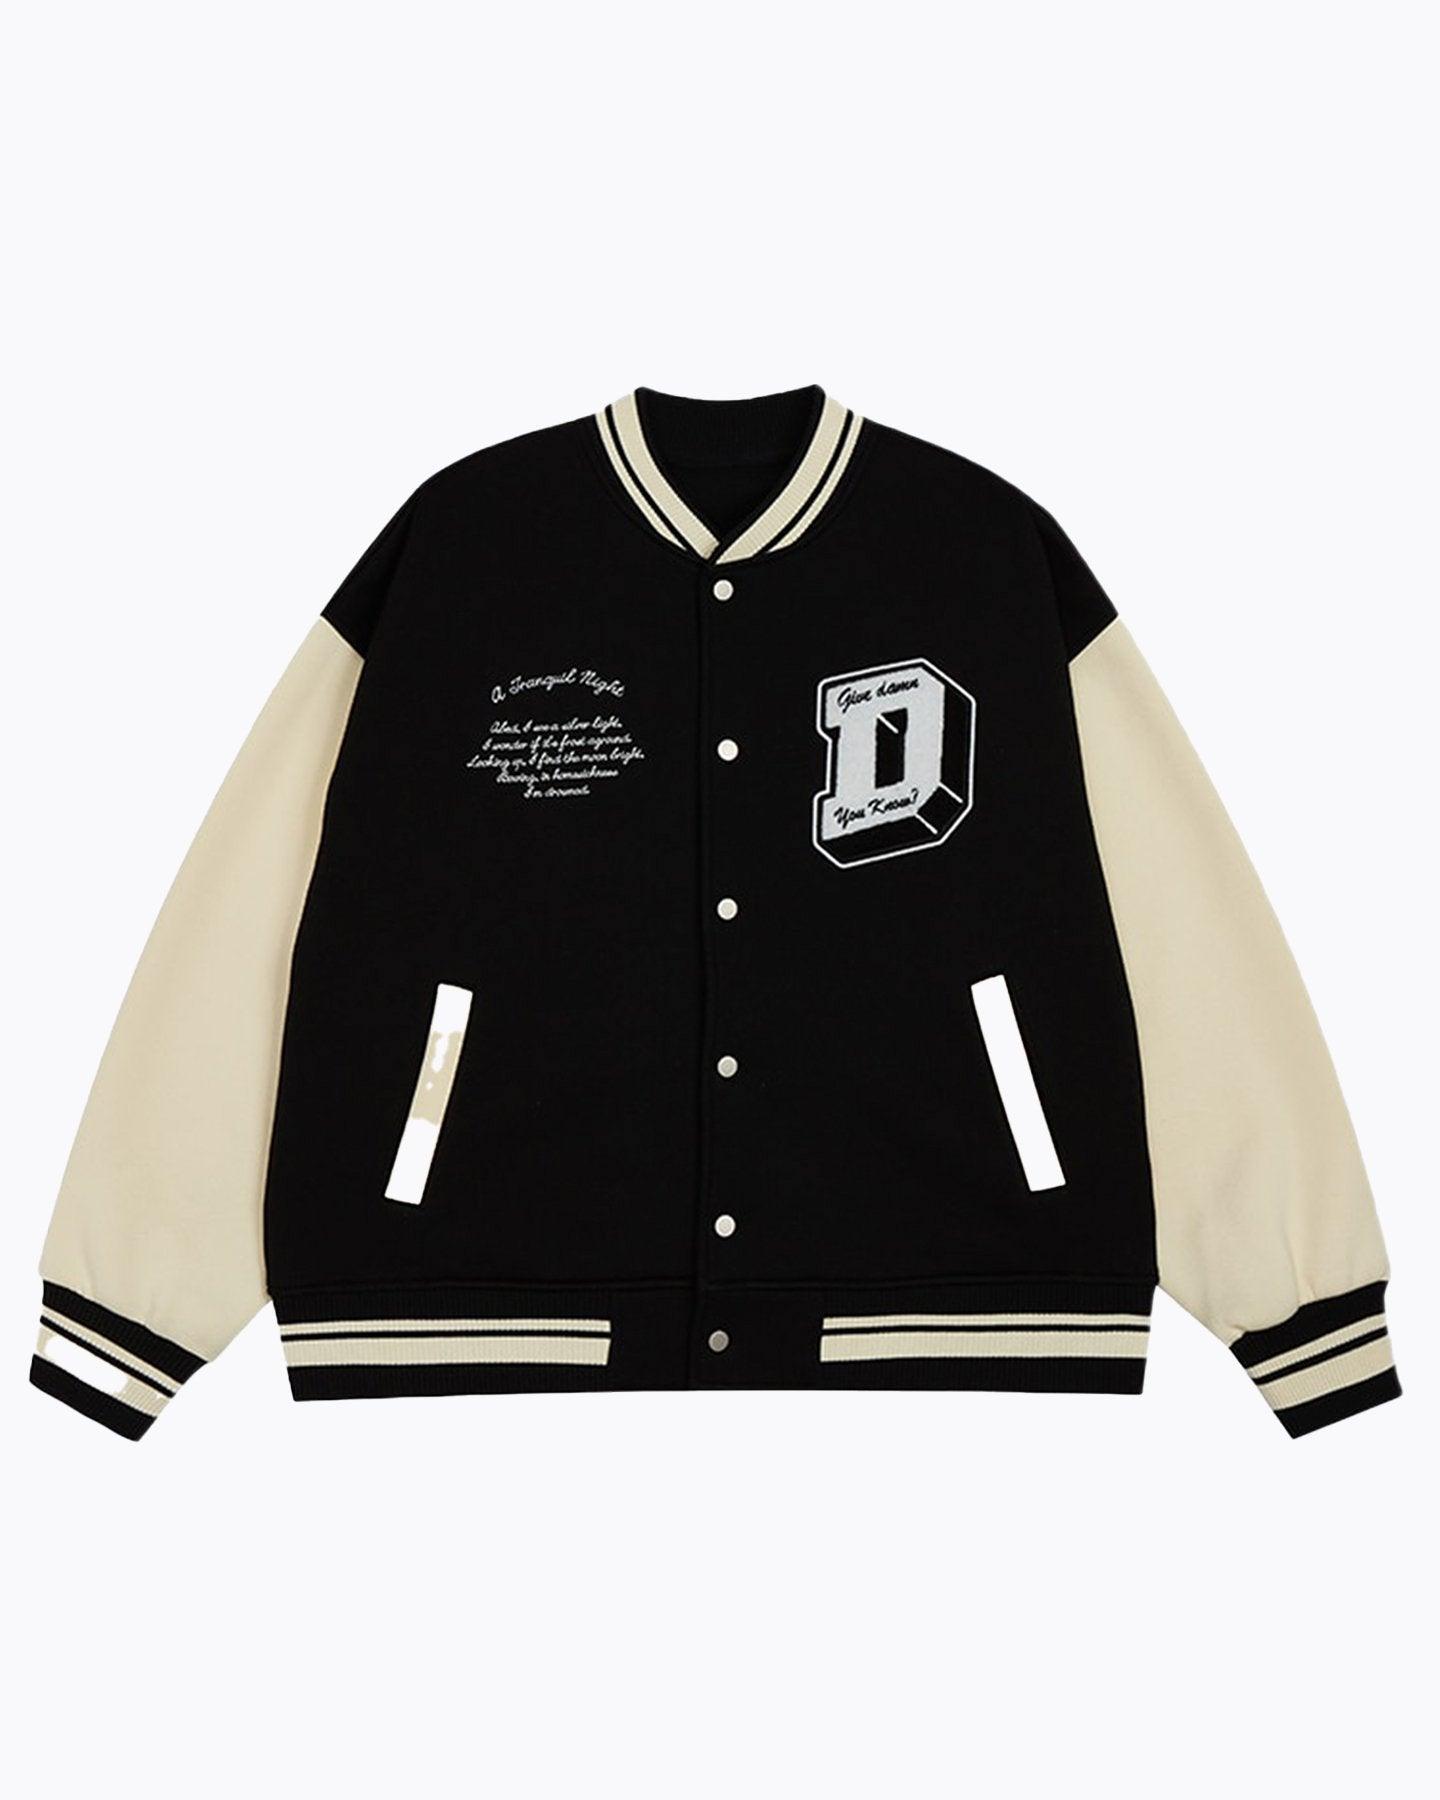 Sentient Official - Sentient X Inflation  Fleece Varsity Jacket.  All gender clothing, Clothing, jacket, jackets, Men's Clothing, Men's Jackets, Women's Clothing, Women's Jackets